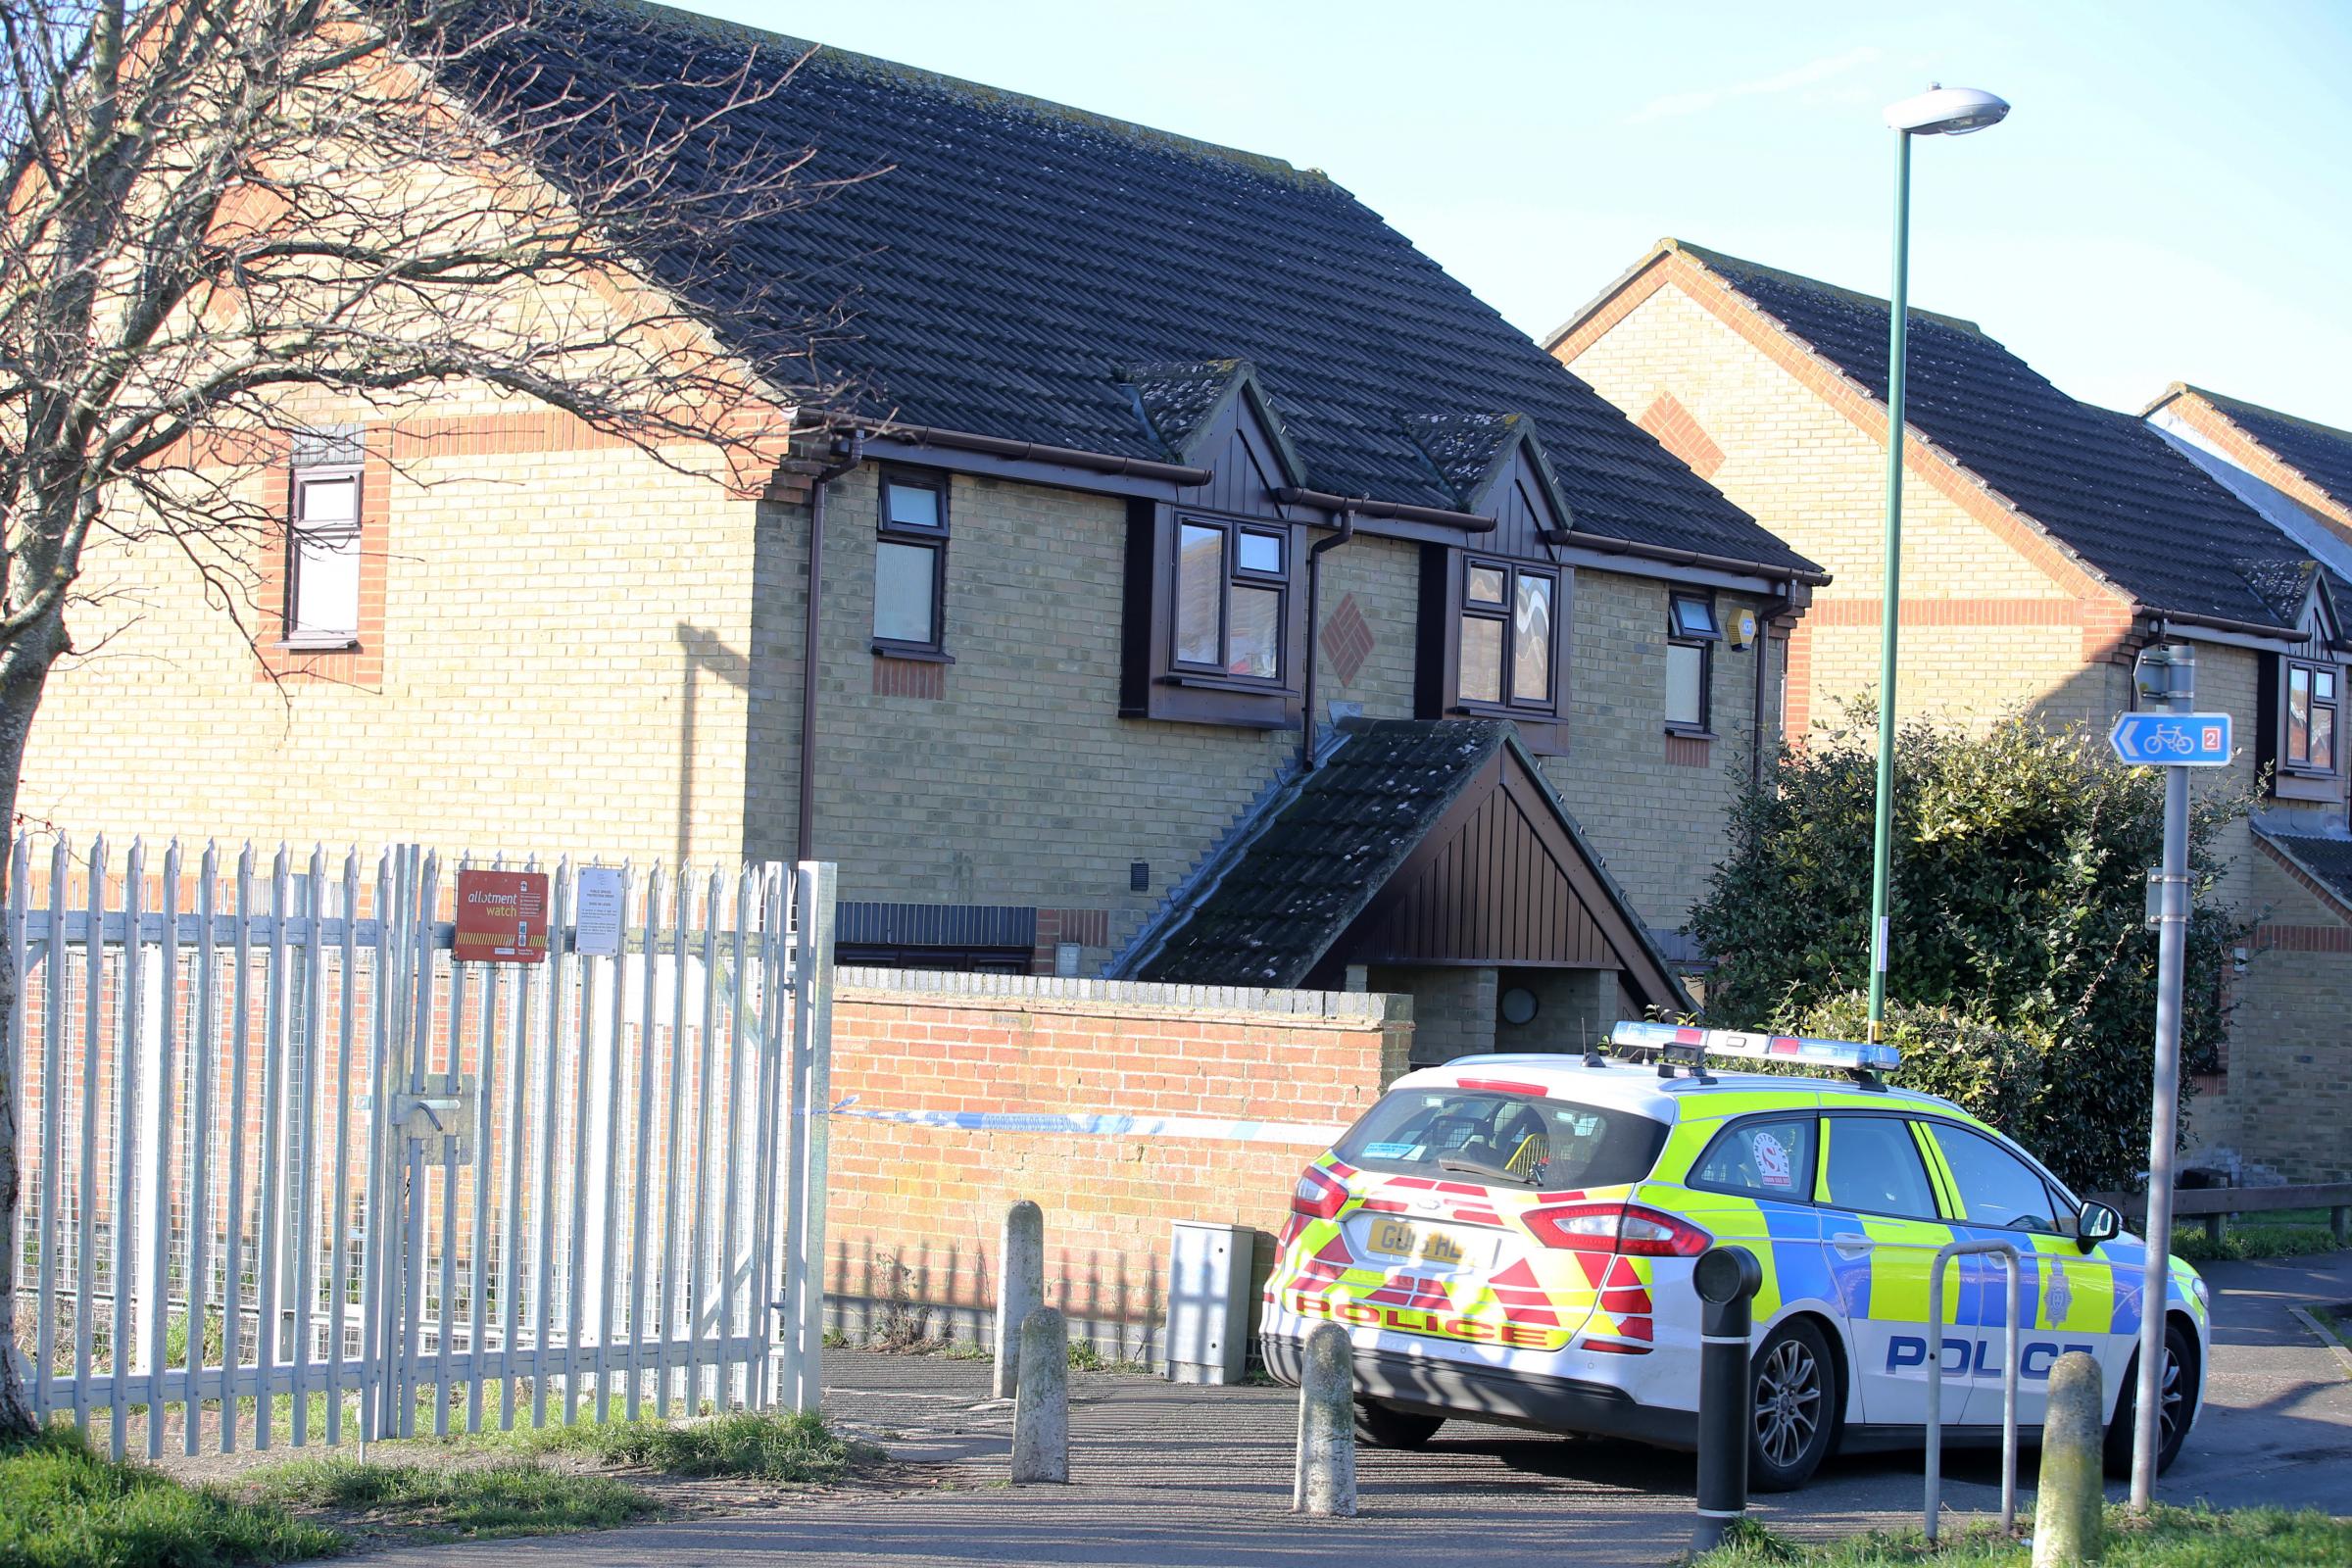 The scene in Nicolson Drive, Shoreham. Jordan Bell is accused of breaking into the home of David Evans in Shoreham and stabbing the man in front of his daughter as part of an aggravated gang burlgary